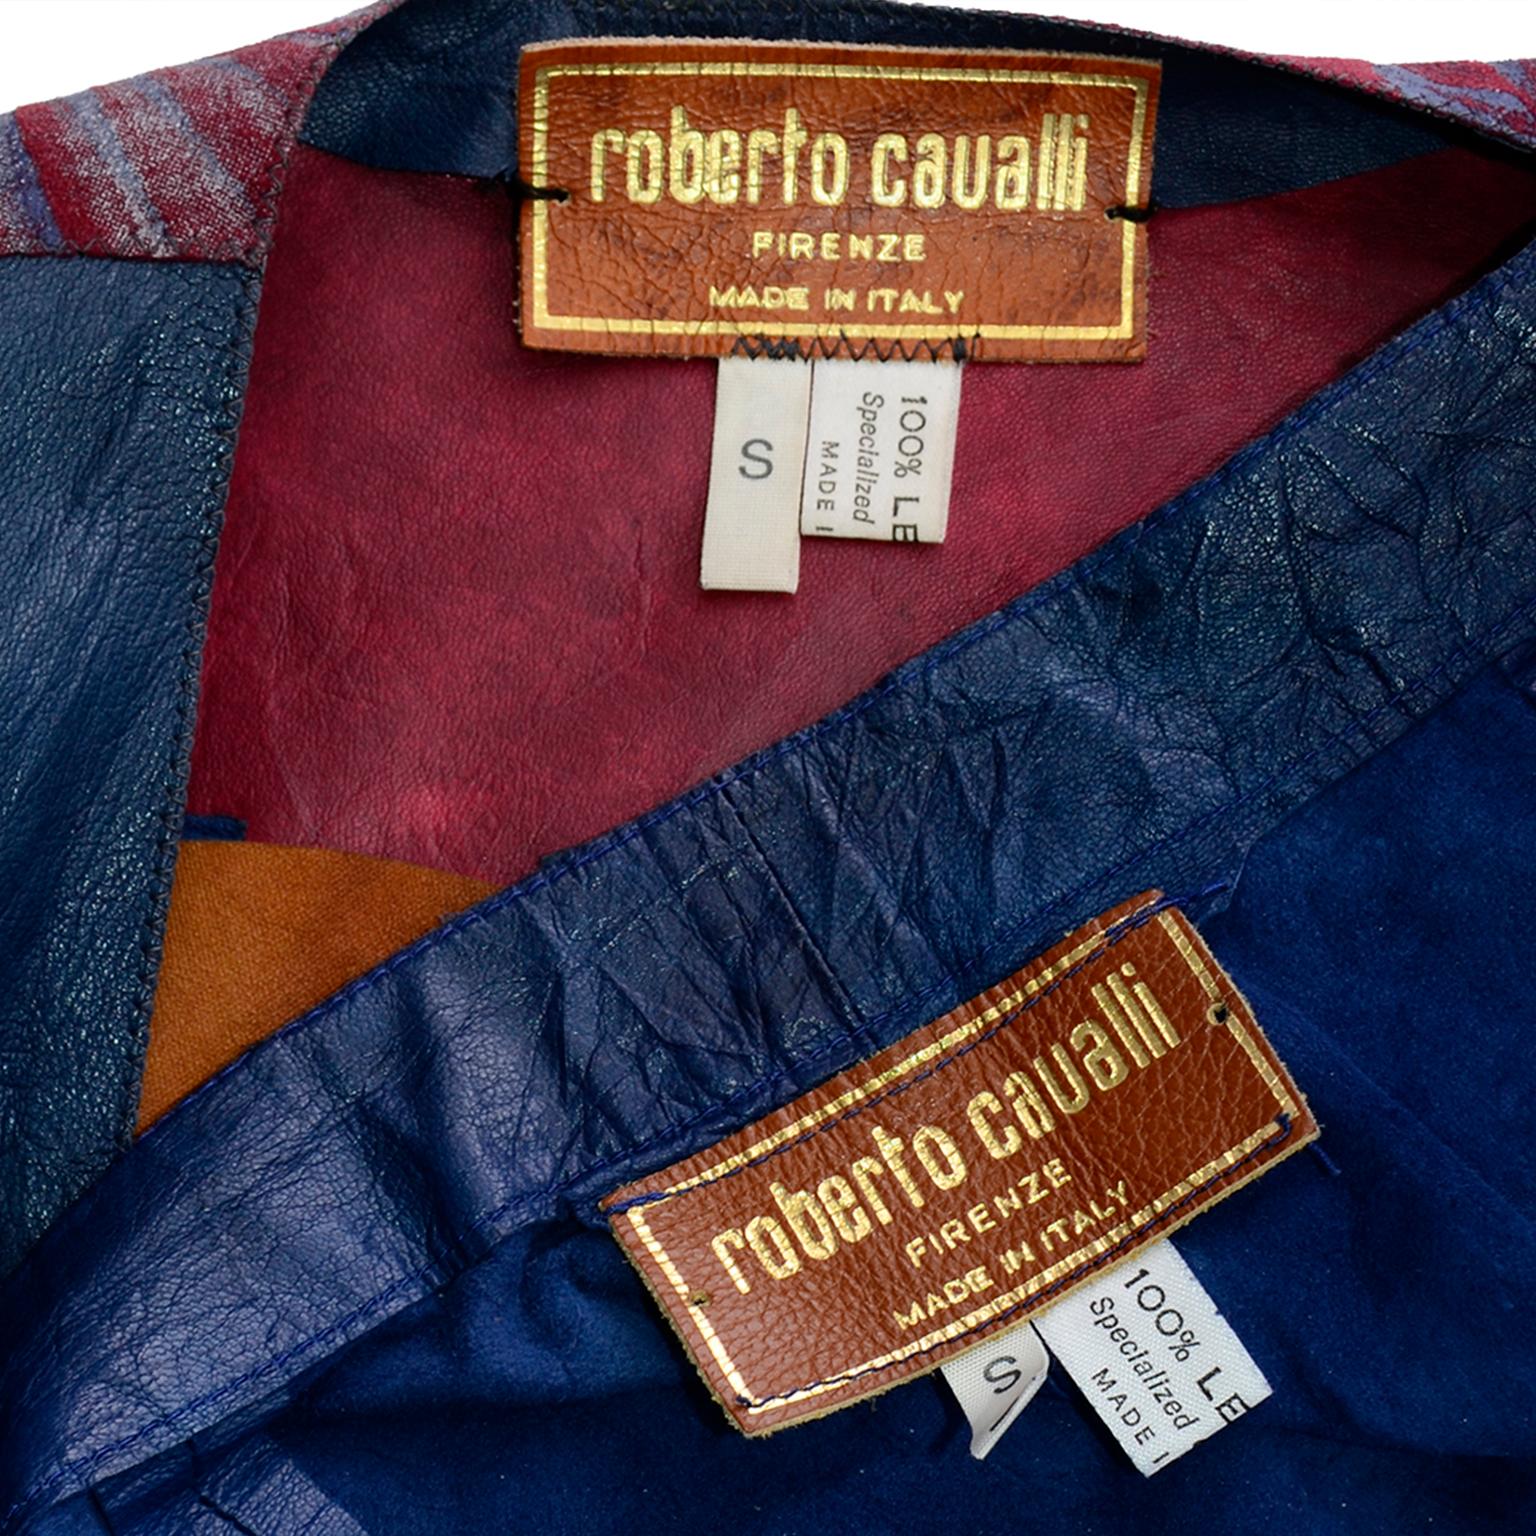 Roberto Cavalli Patchwork Blue Leather Pants & Hand Painted Jacket Suit Outfit For Sale 7